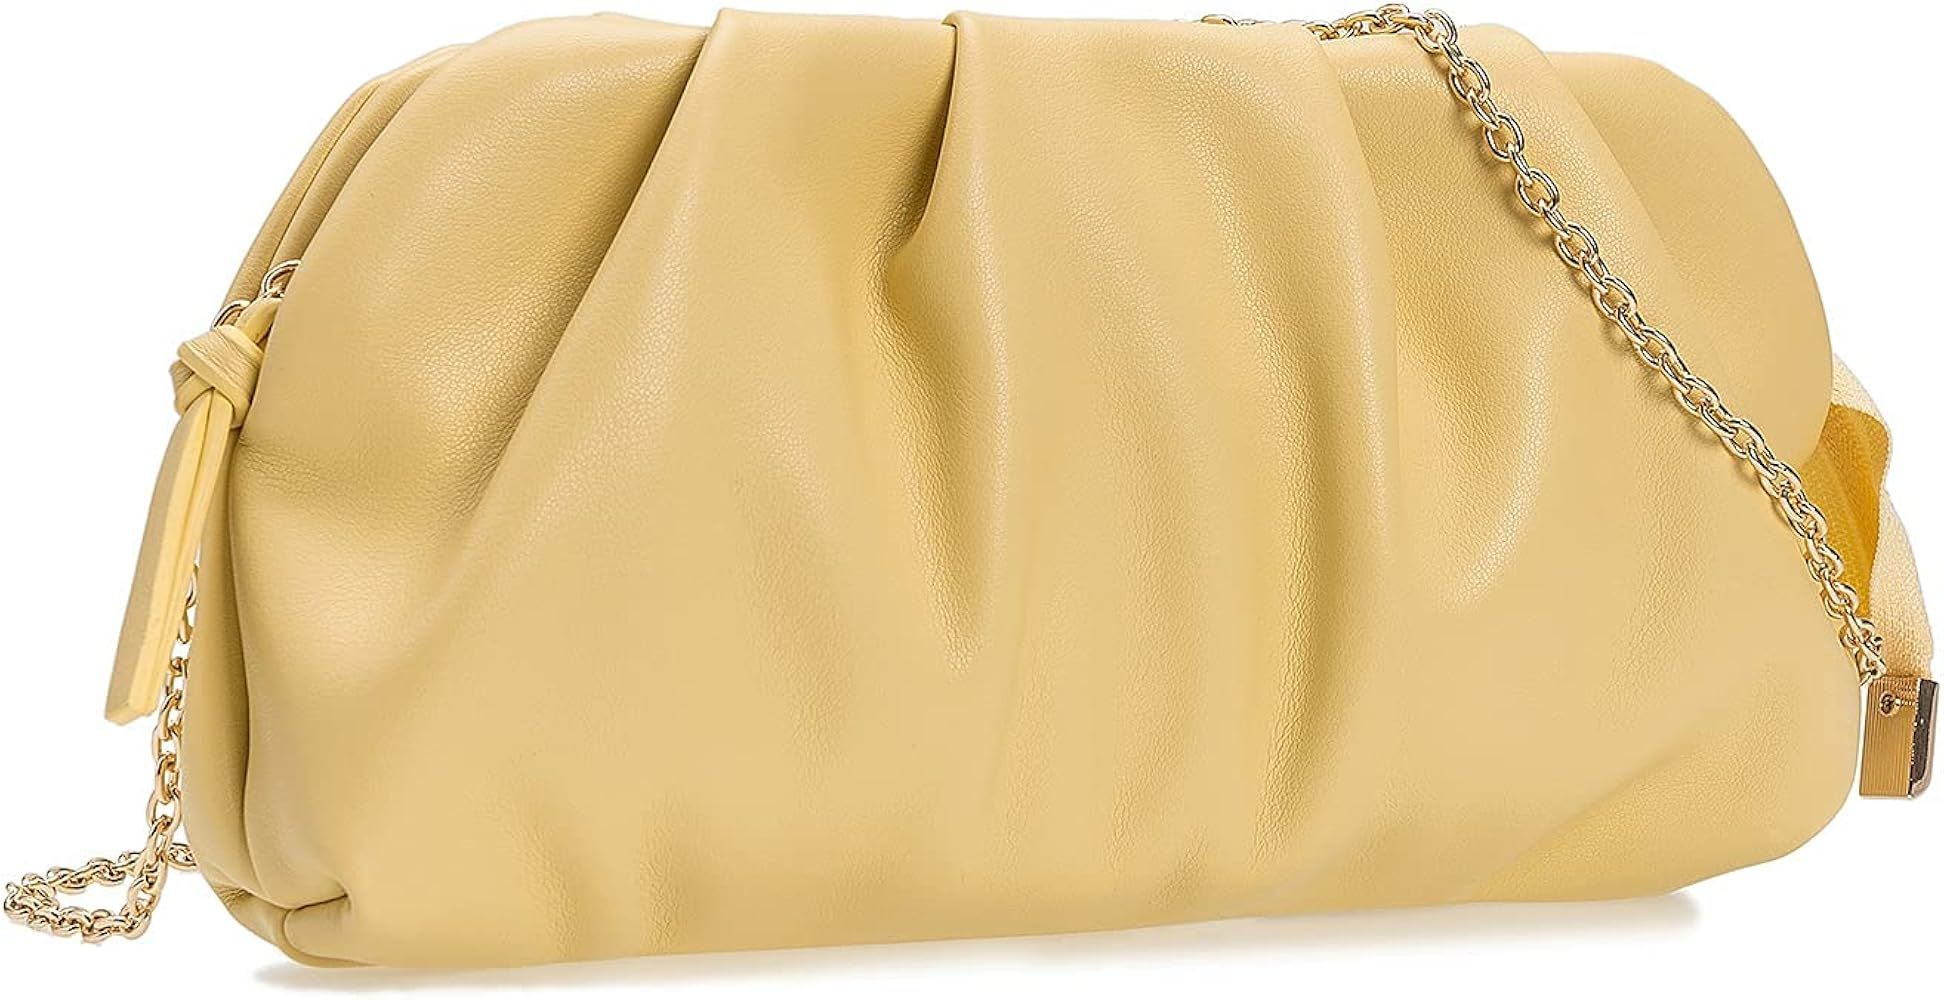 Charming Tailor Chic Soft Vegan Leather Clutch Bag Dressy Pleated PU Evening Purse for Women | Amazon (US)